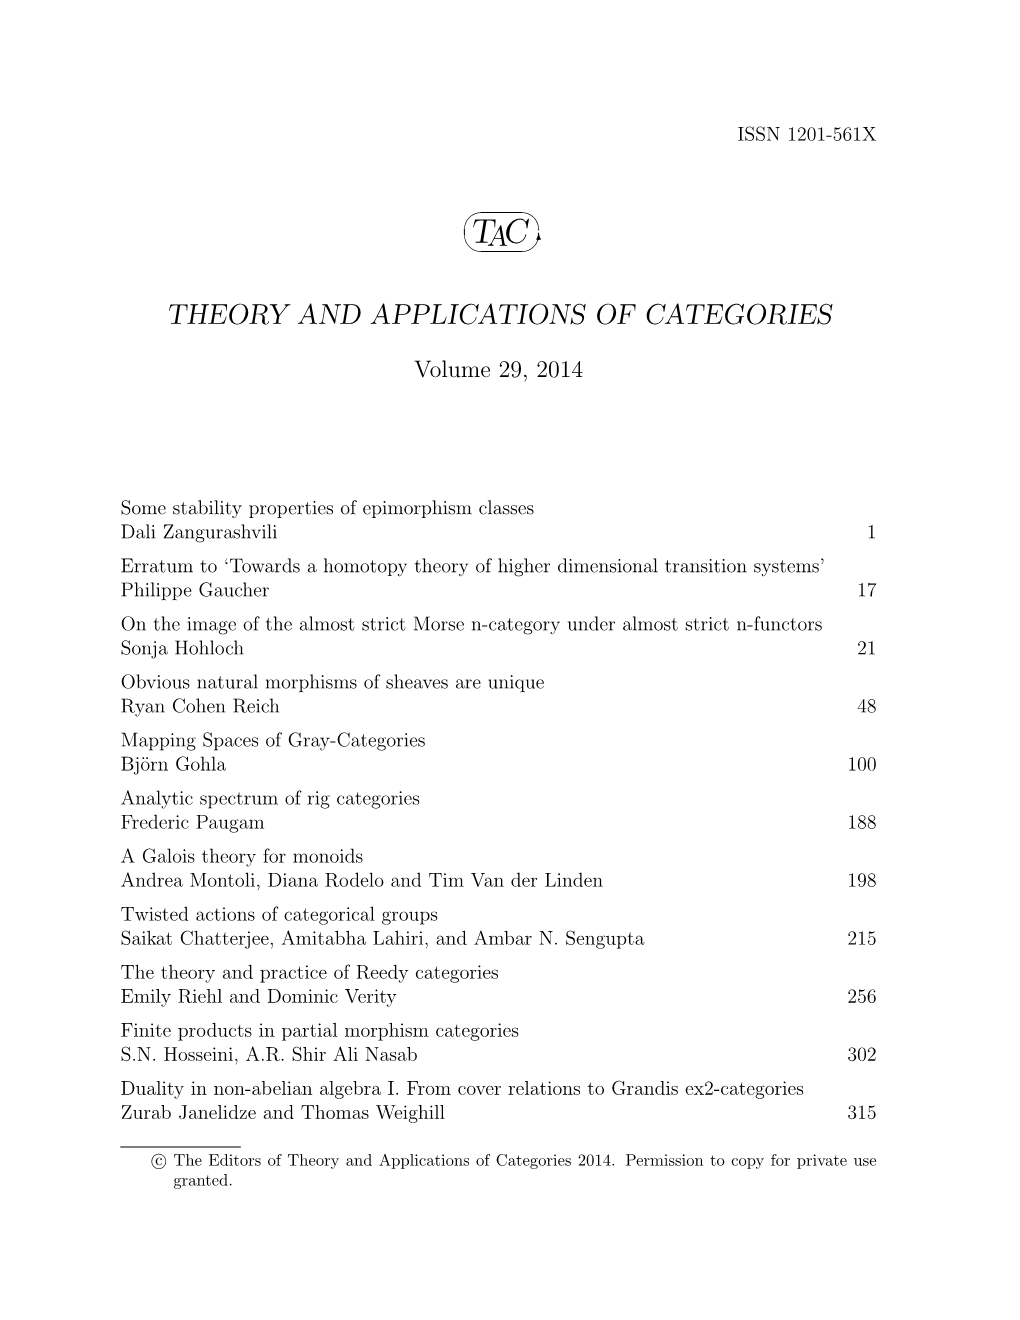 Theory and Applications of Categories